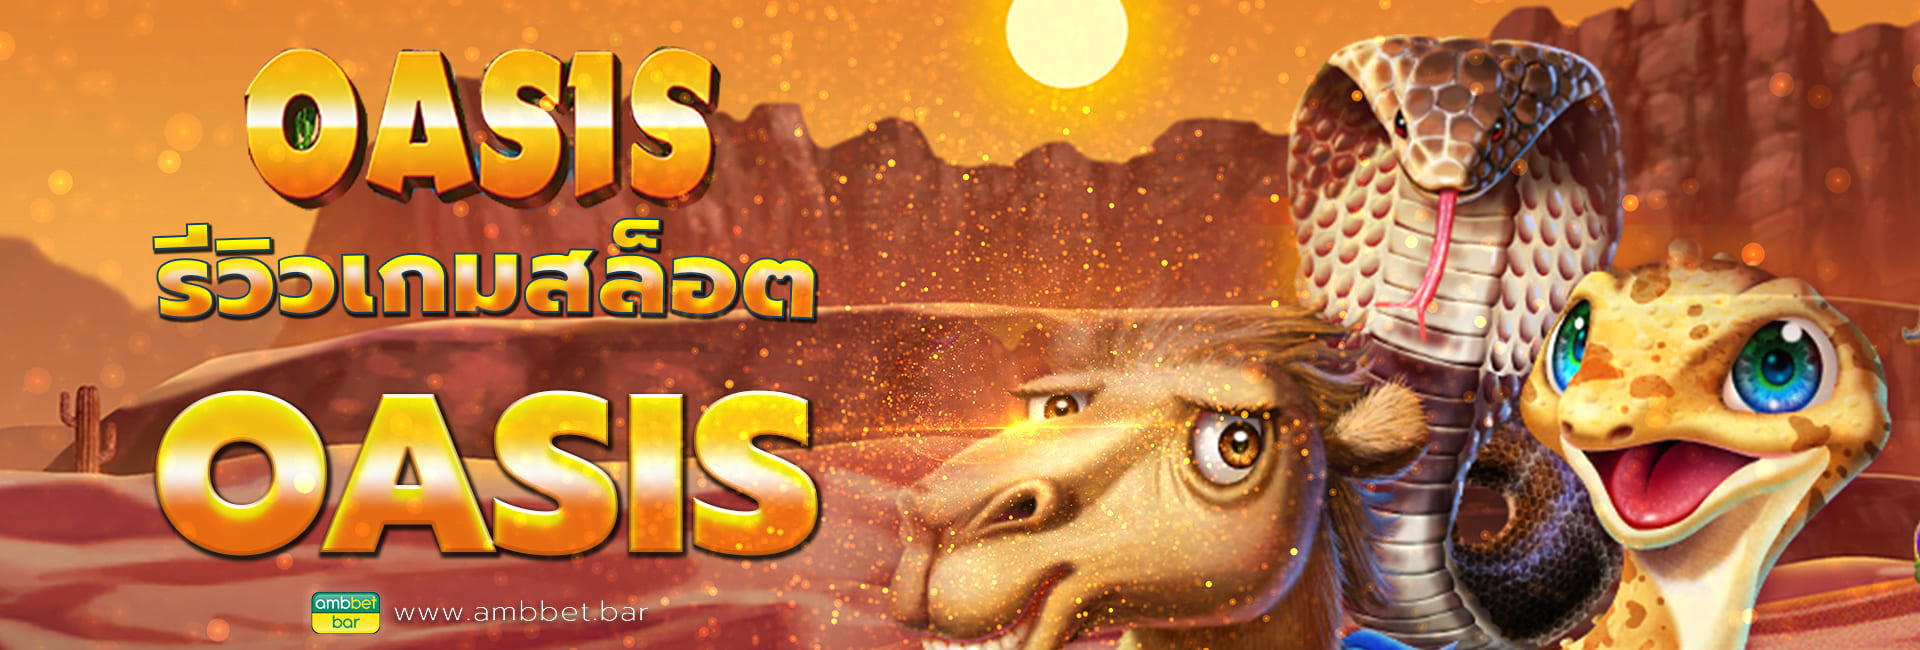 Oasis banner